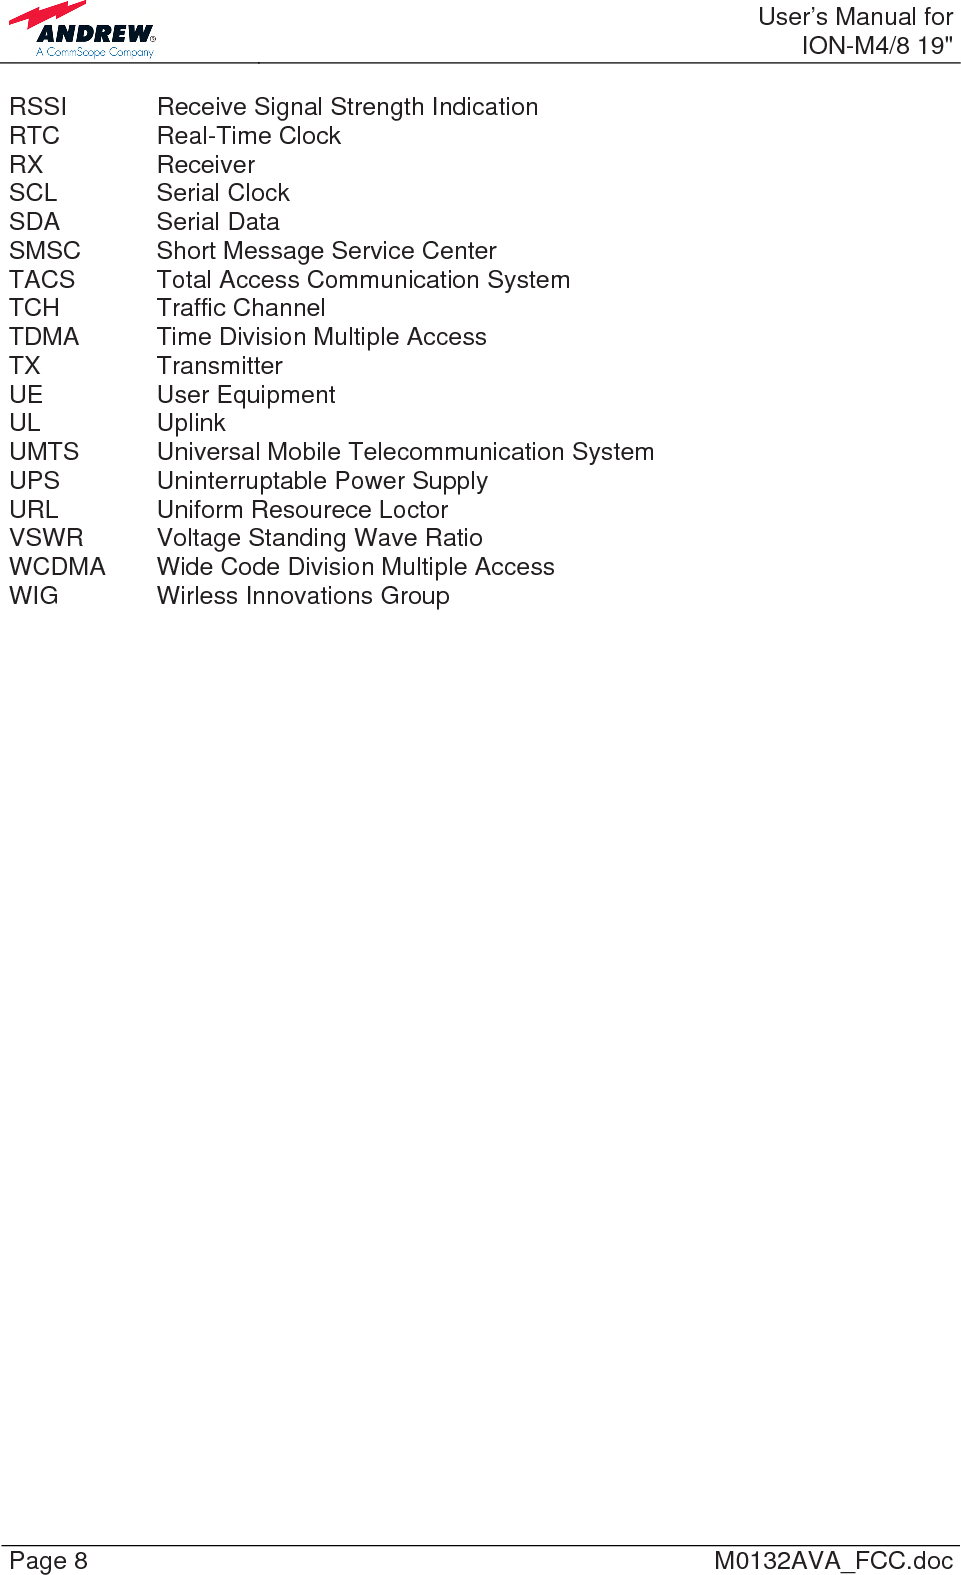  User’s Manual forION-M4/8 19&quot; Page 8  M0132AVA_FCC.doc RSSI    Receive Signal Strength Indication RTC   Real-Time Clock RX   Receiver SCL   Serial Clock SDA   Serial Data SMSC   Short Message Service Center TACS   Total Access Communication System TCH   Traffic Channel TDMA   Time Division Multiple Access TX   Transmitter UE   User Equipment UL   Uplink UMTS   Universal  Mobile  Telecommunication System UPS    Uninterruptable Power Supply URL    Uniform Resourece Loctor VSWR  Voltage Standing Wave Ratio WCDMA  Wide Code Division Multiple Access WIG    Wirless Innovations Group   